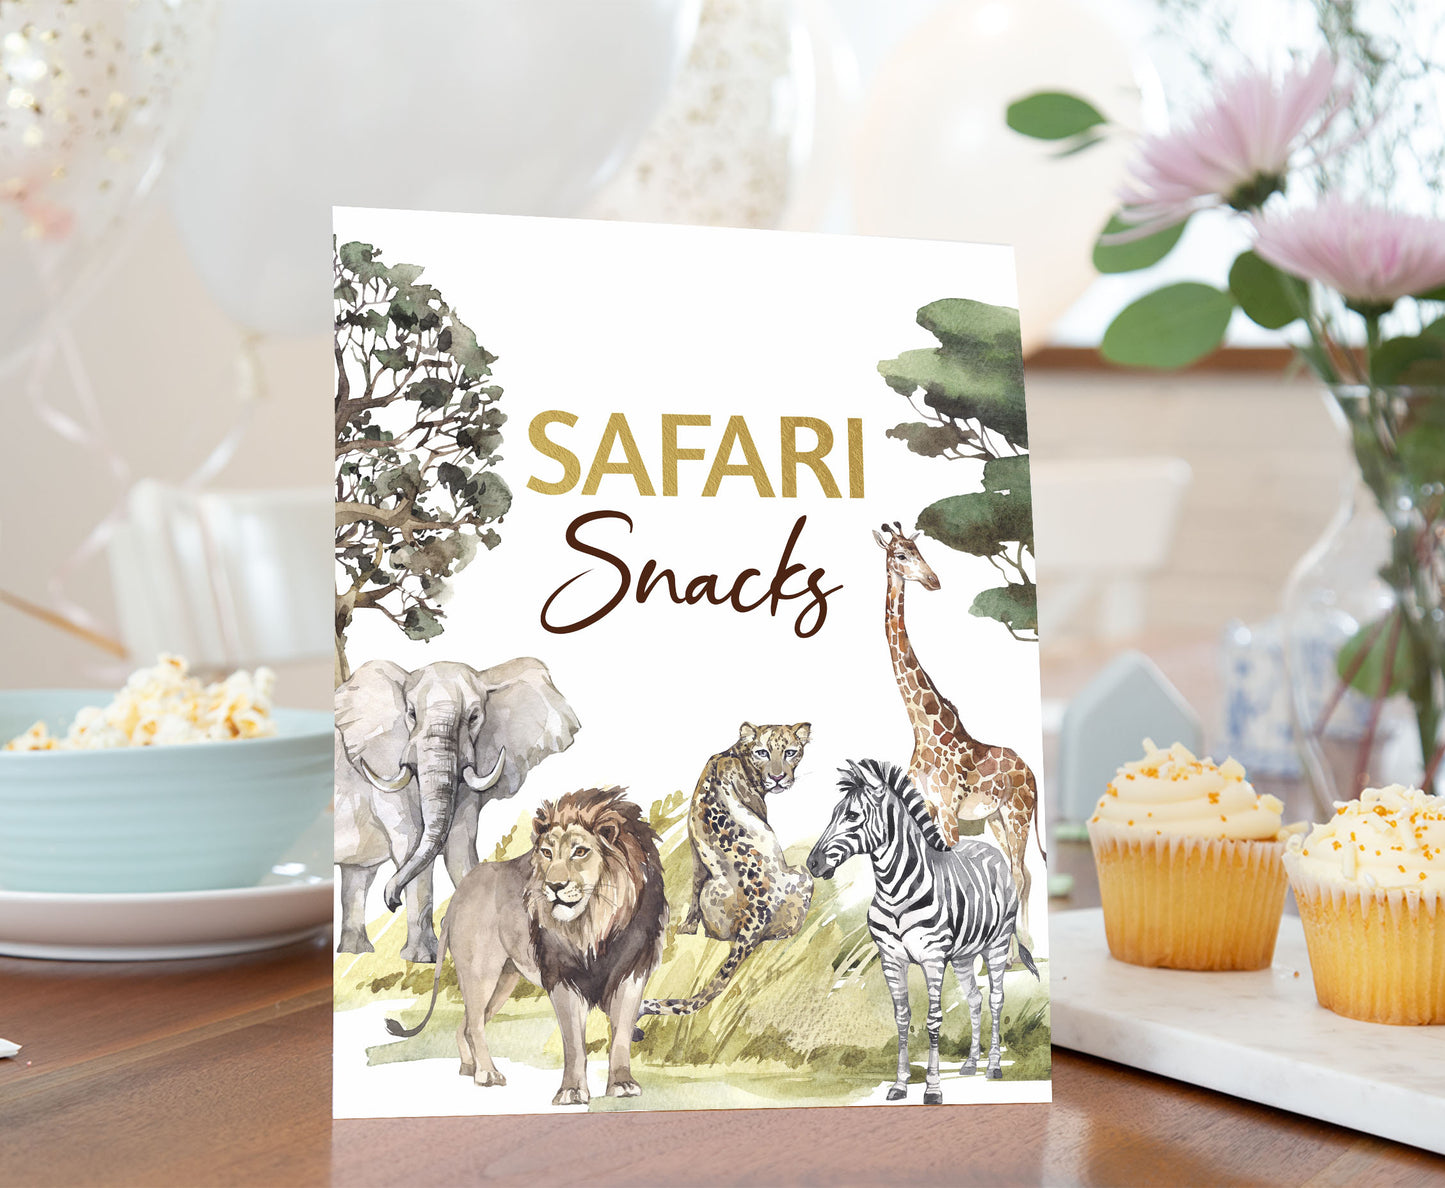 Safari Snacks table sign | Jungle Themed Party Table Decorations - 35I